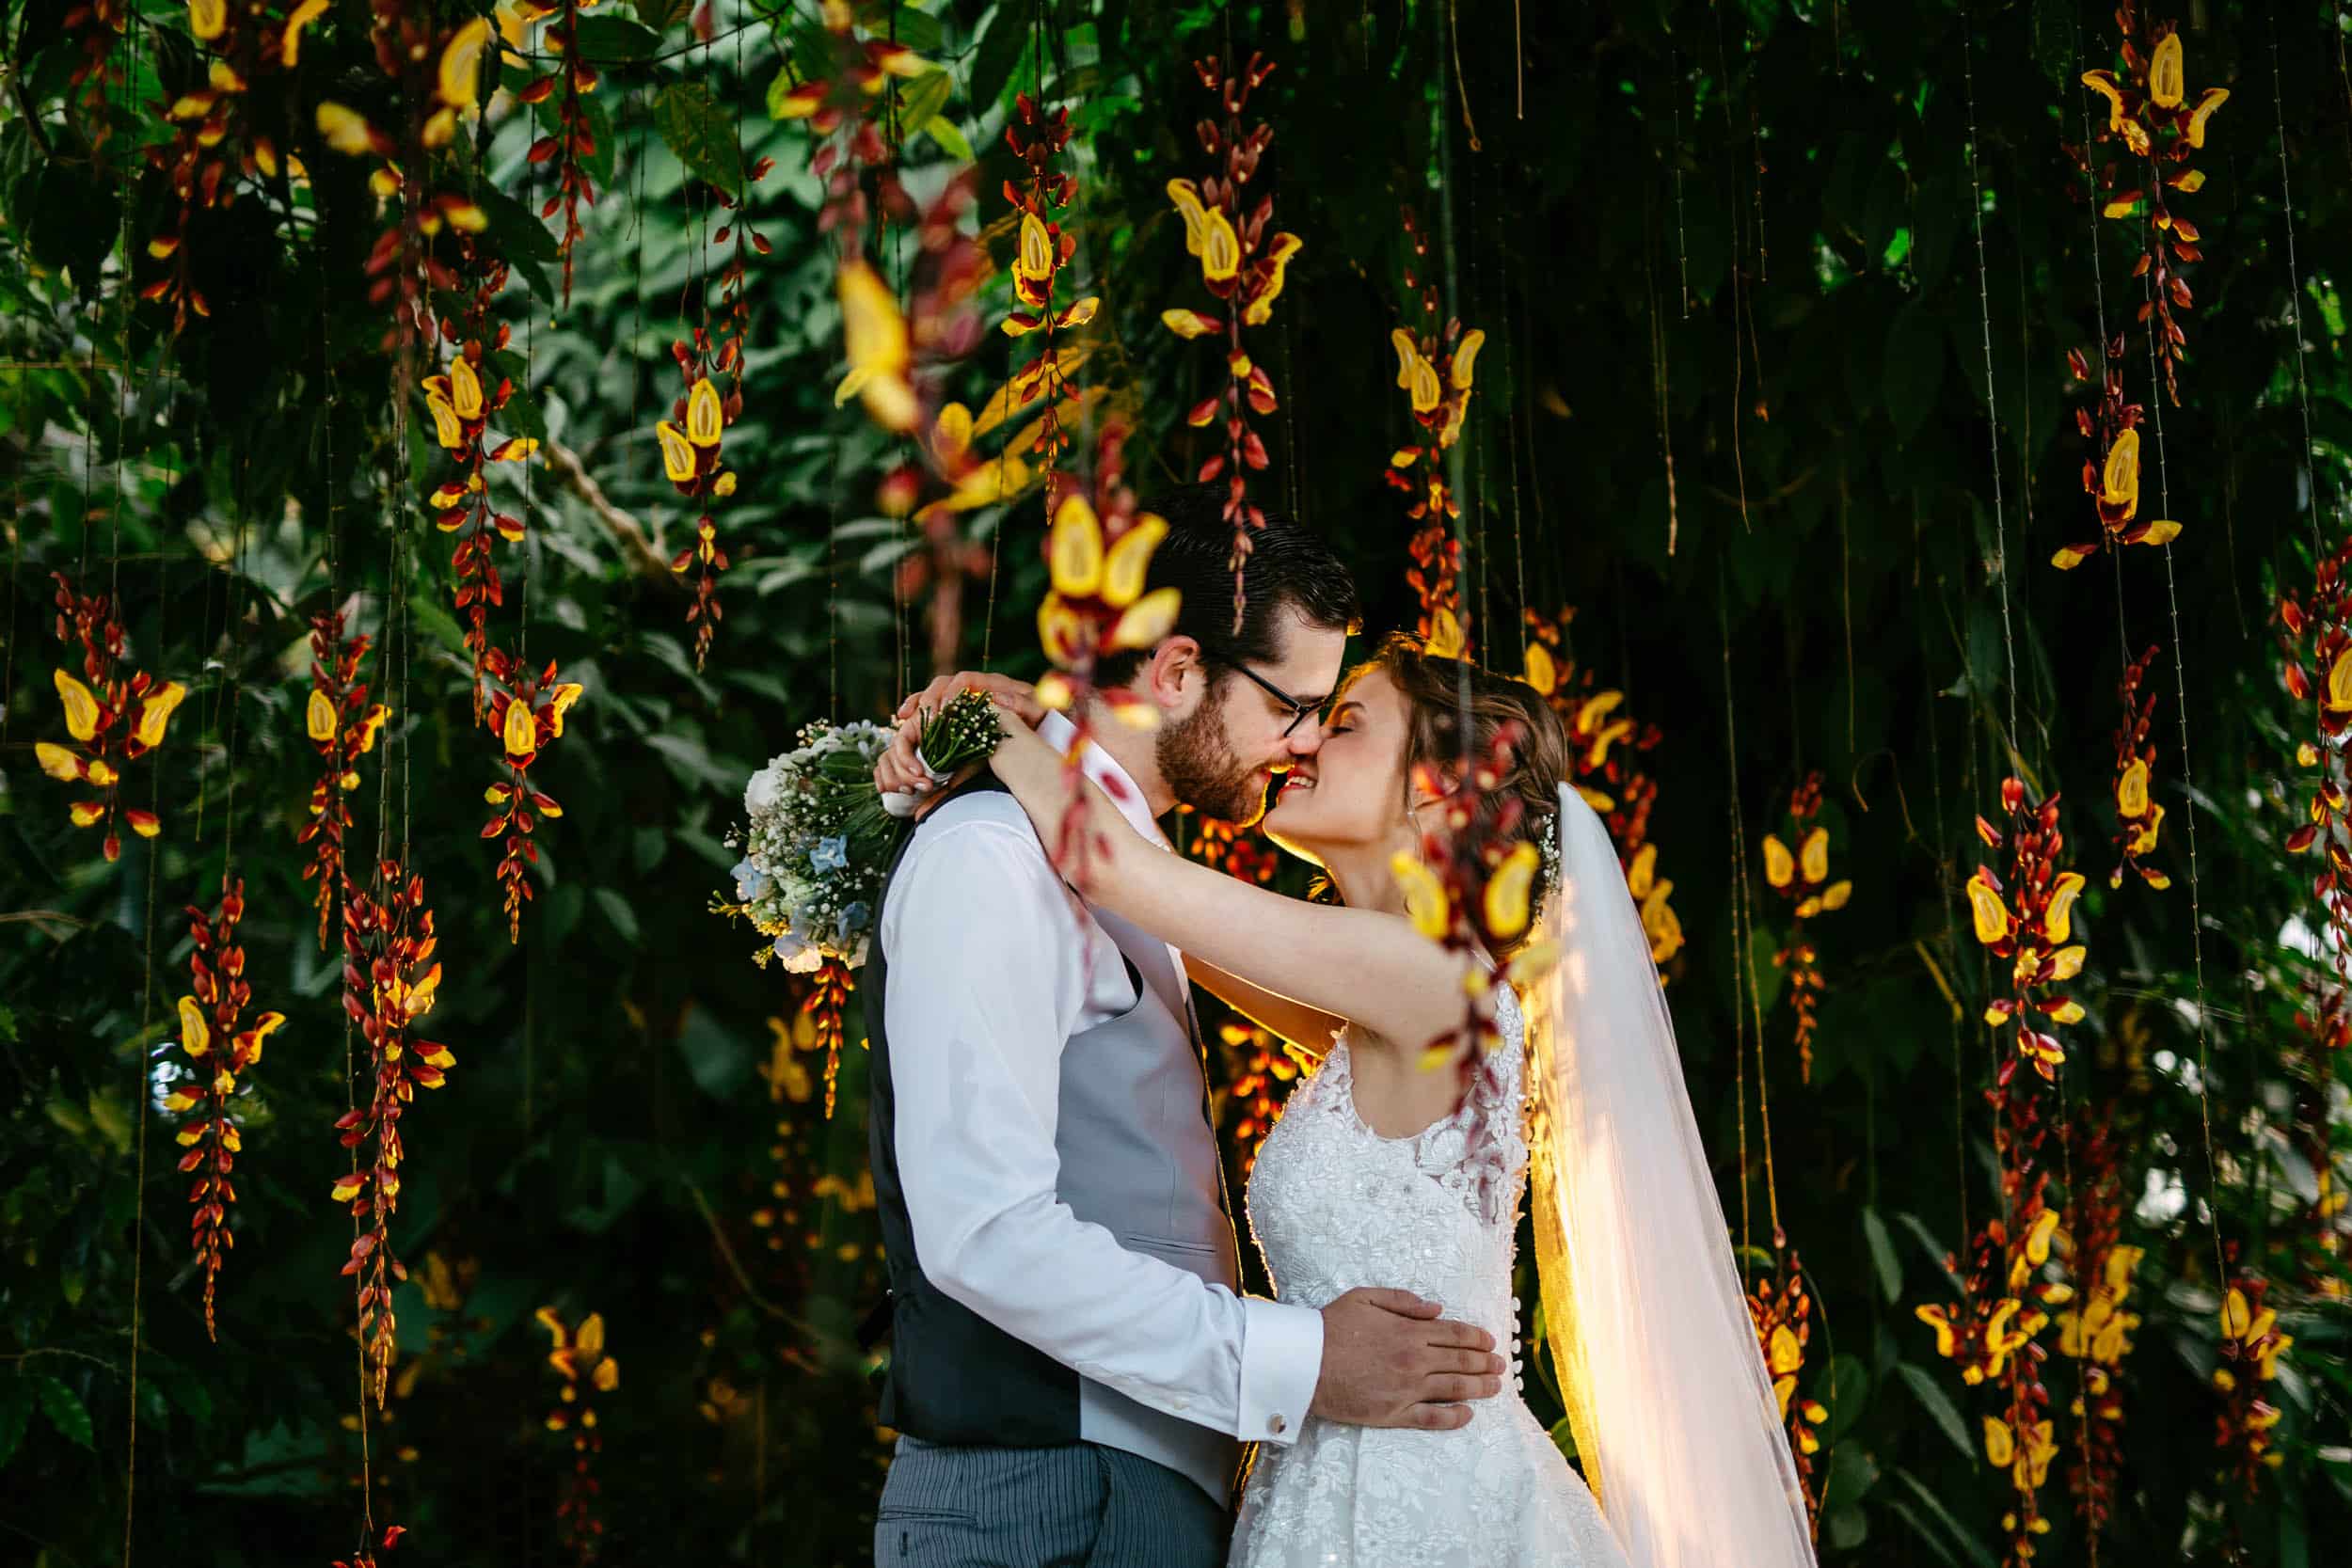 A bride and groom share a sweet kiss in front of a beautiful flower garden at their Wedding at Delft Botanical Garden.